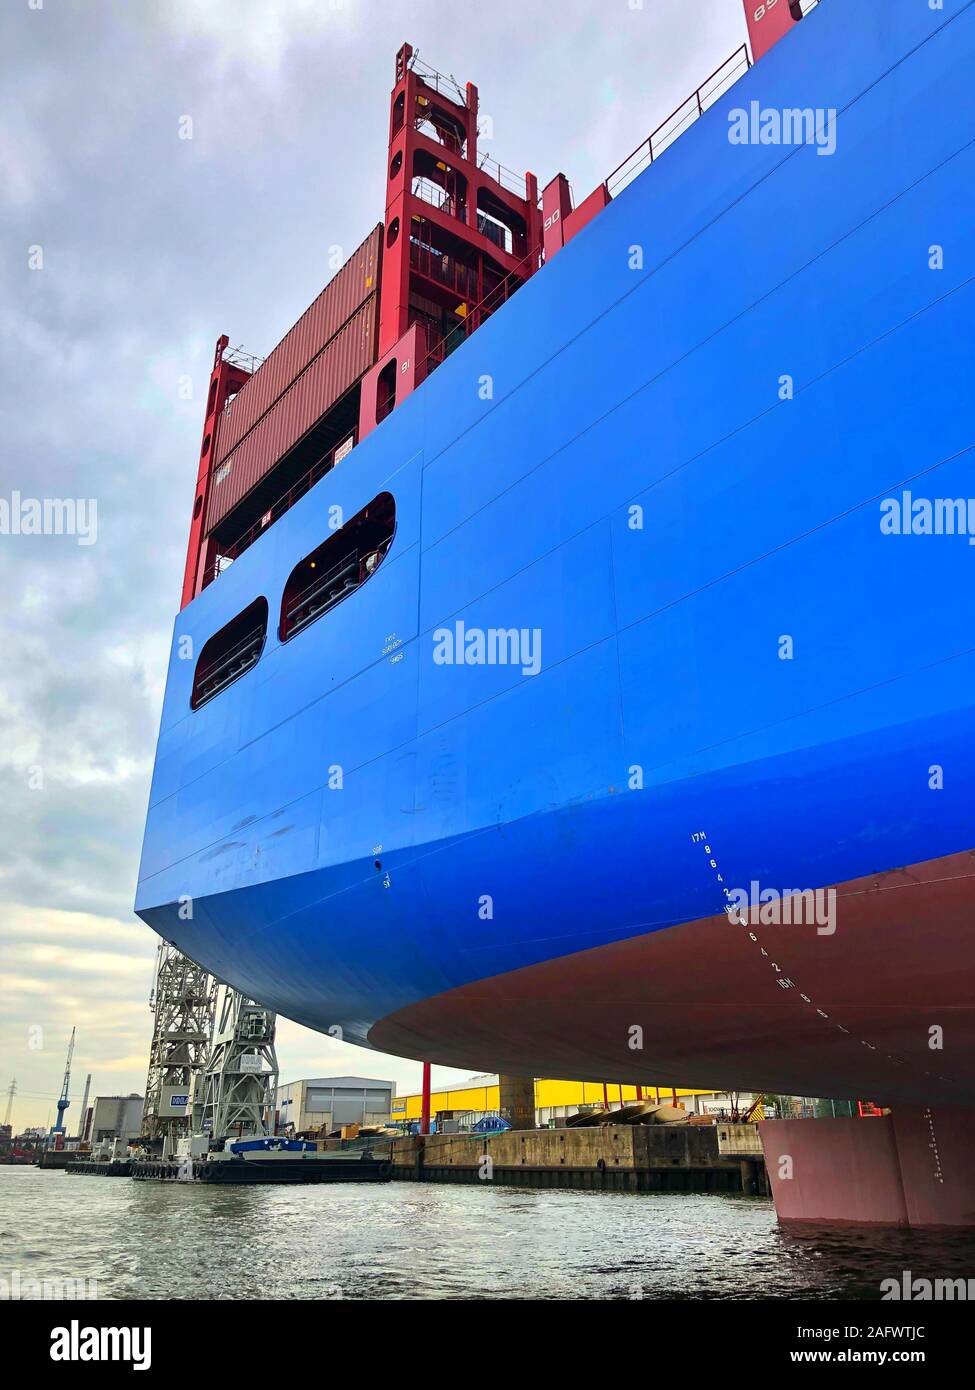 Hamburg,Germany - August 17,2018: The container ship COSCO Shipping Leo in Hamburg harbor. UniverseChina Ocean Shipping Company, known as COSCO, was a Stock Photo